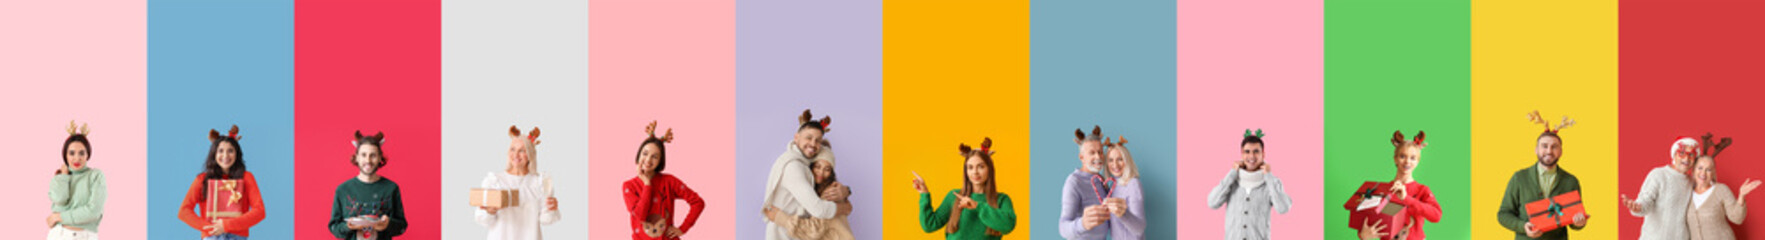 Set of happy people with reindeer horns on colorful background